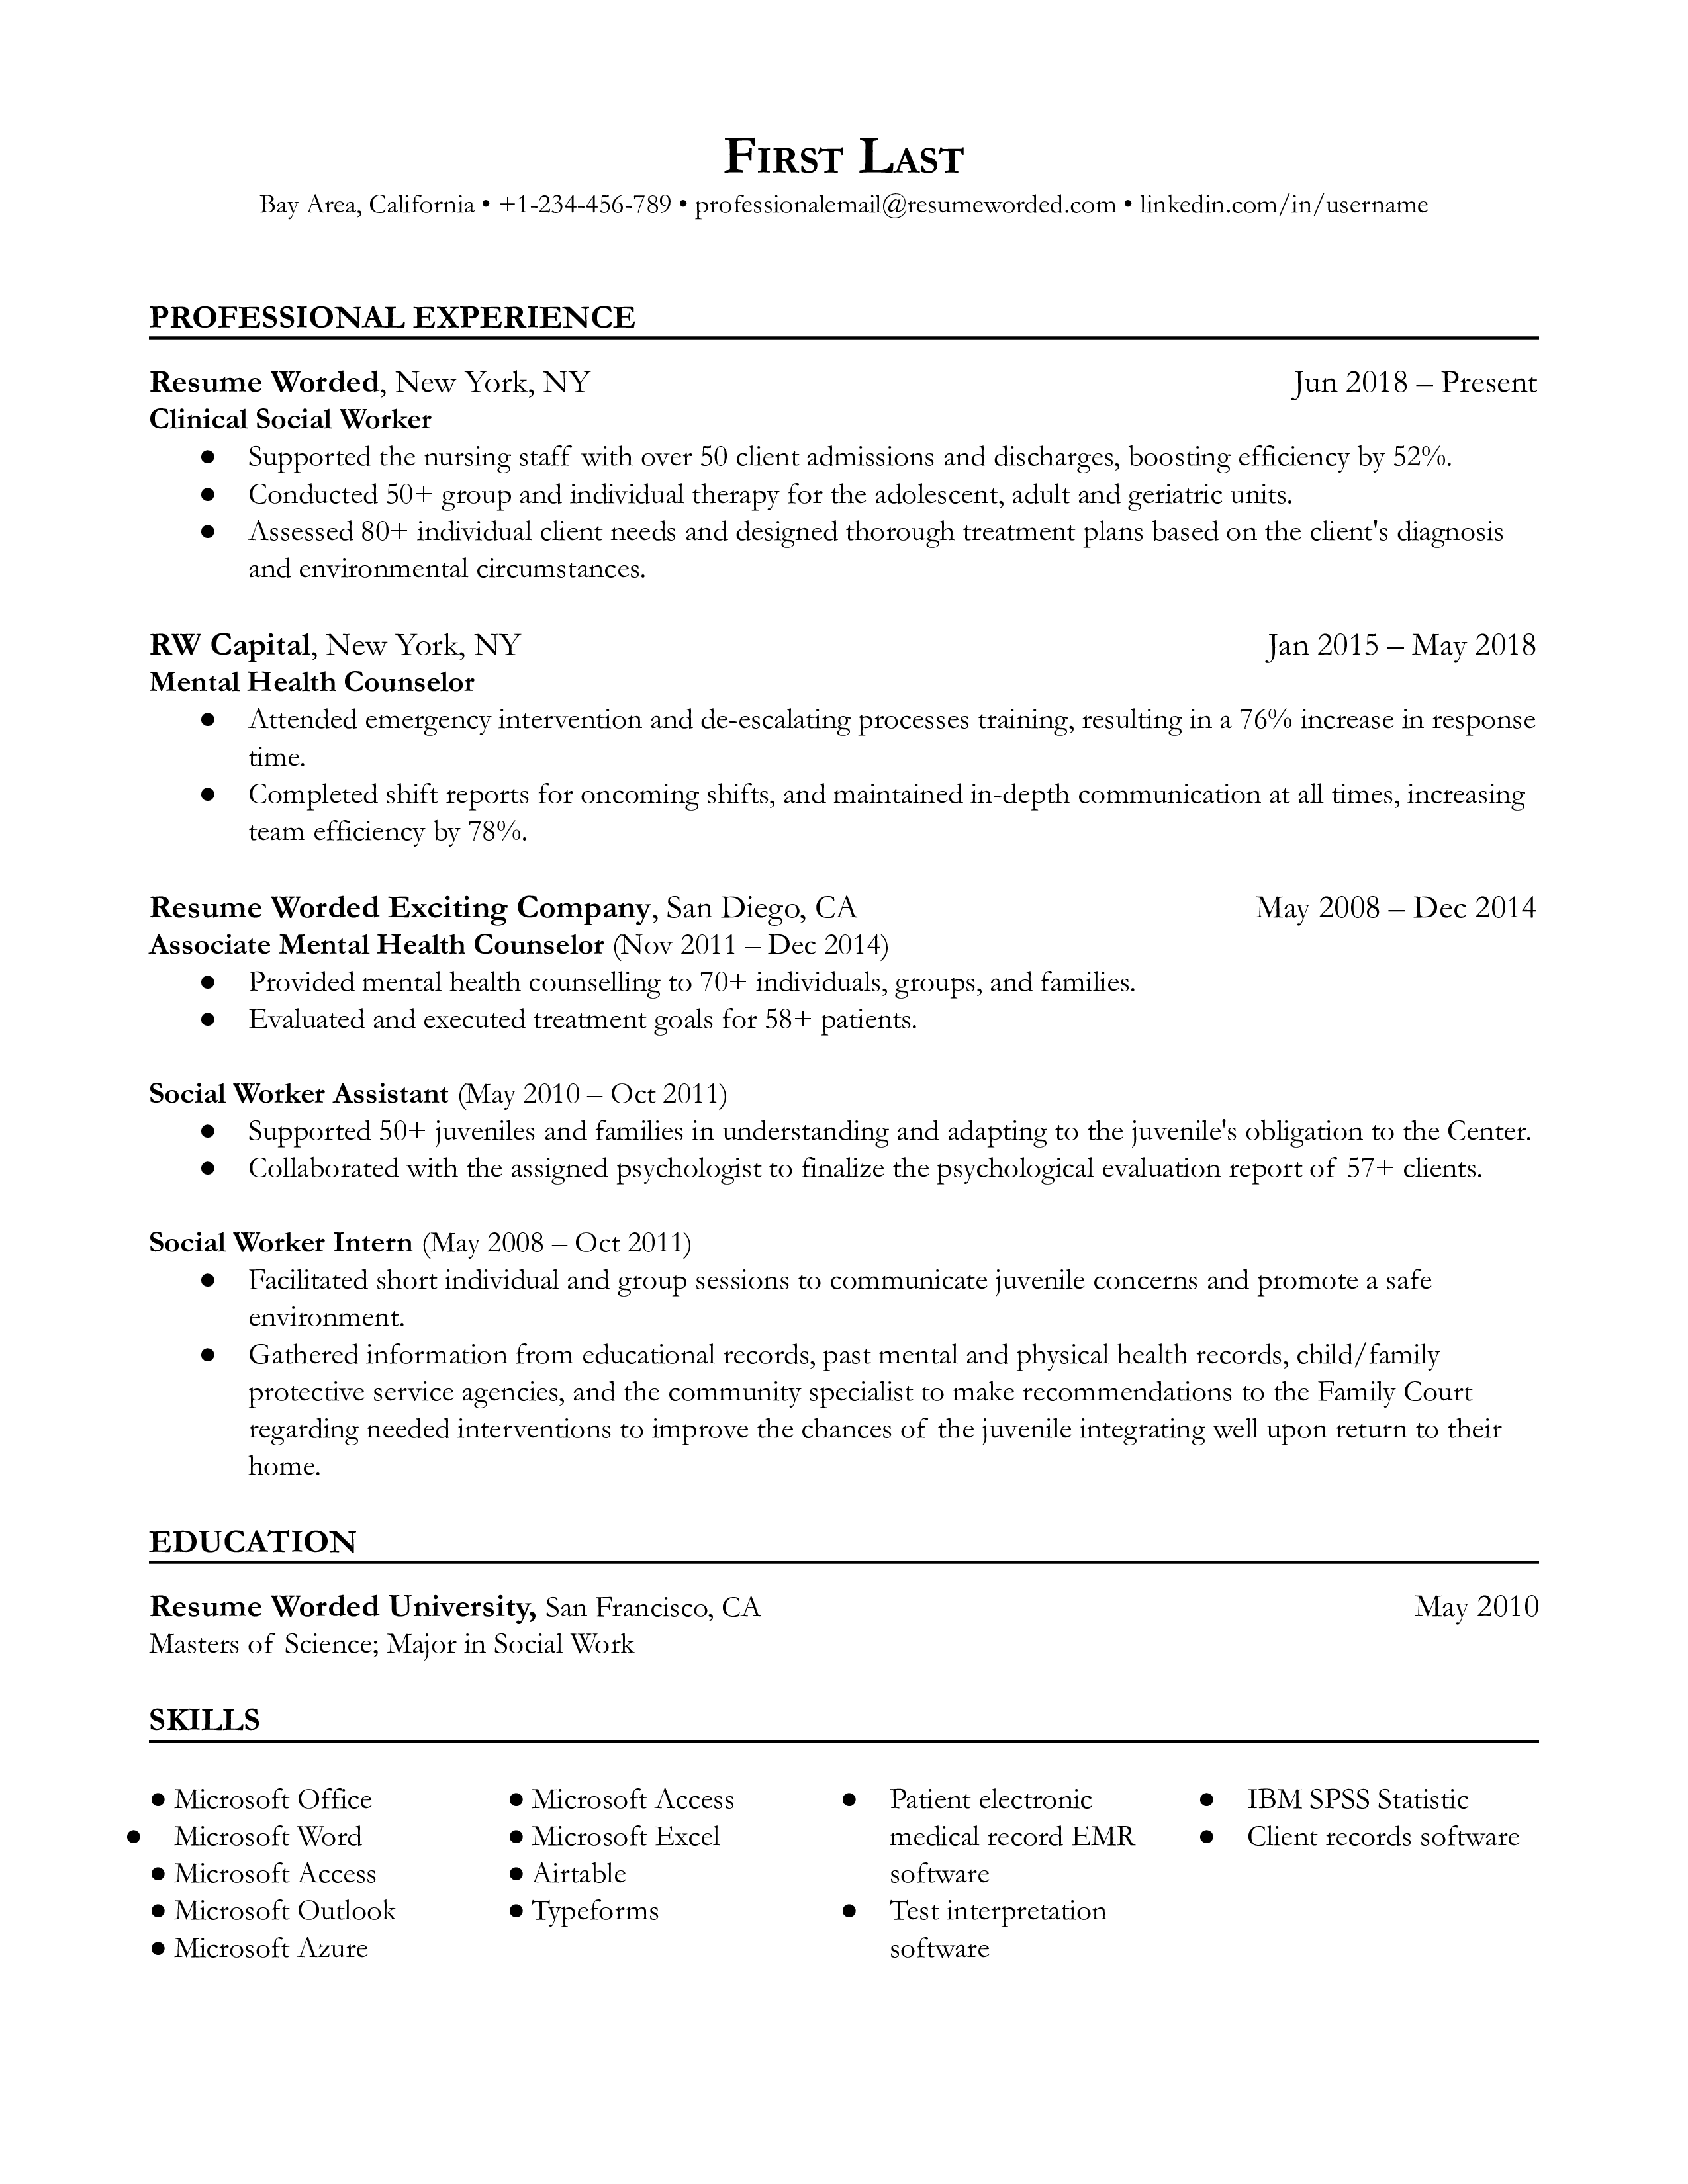 A clinical social worker resume that highlights experience, volunteering, and counseling.